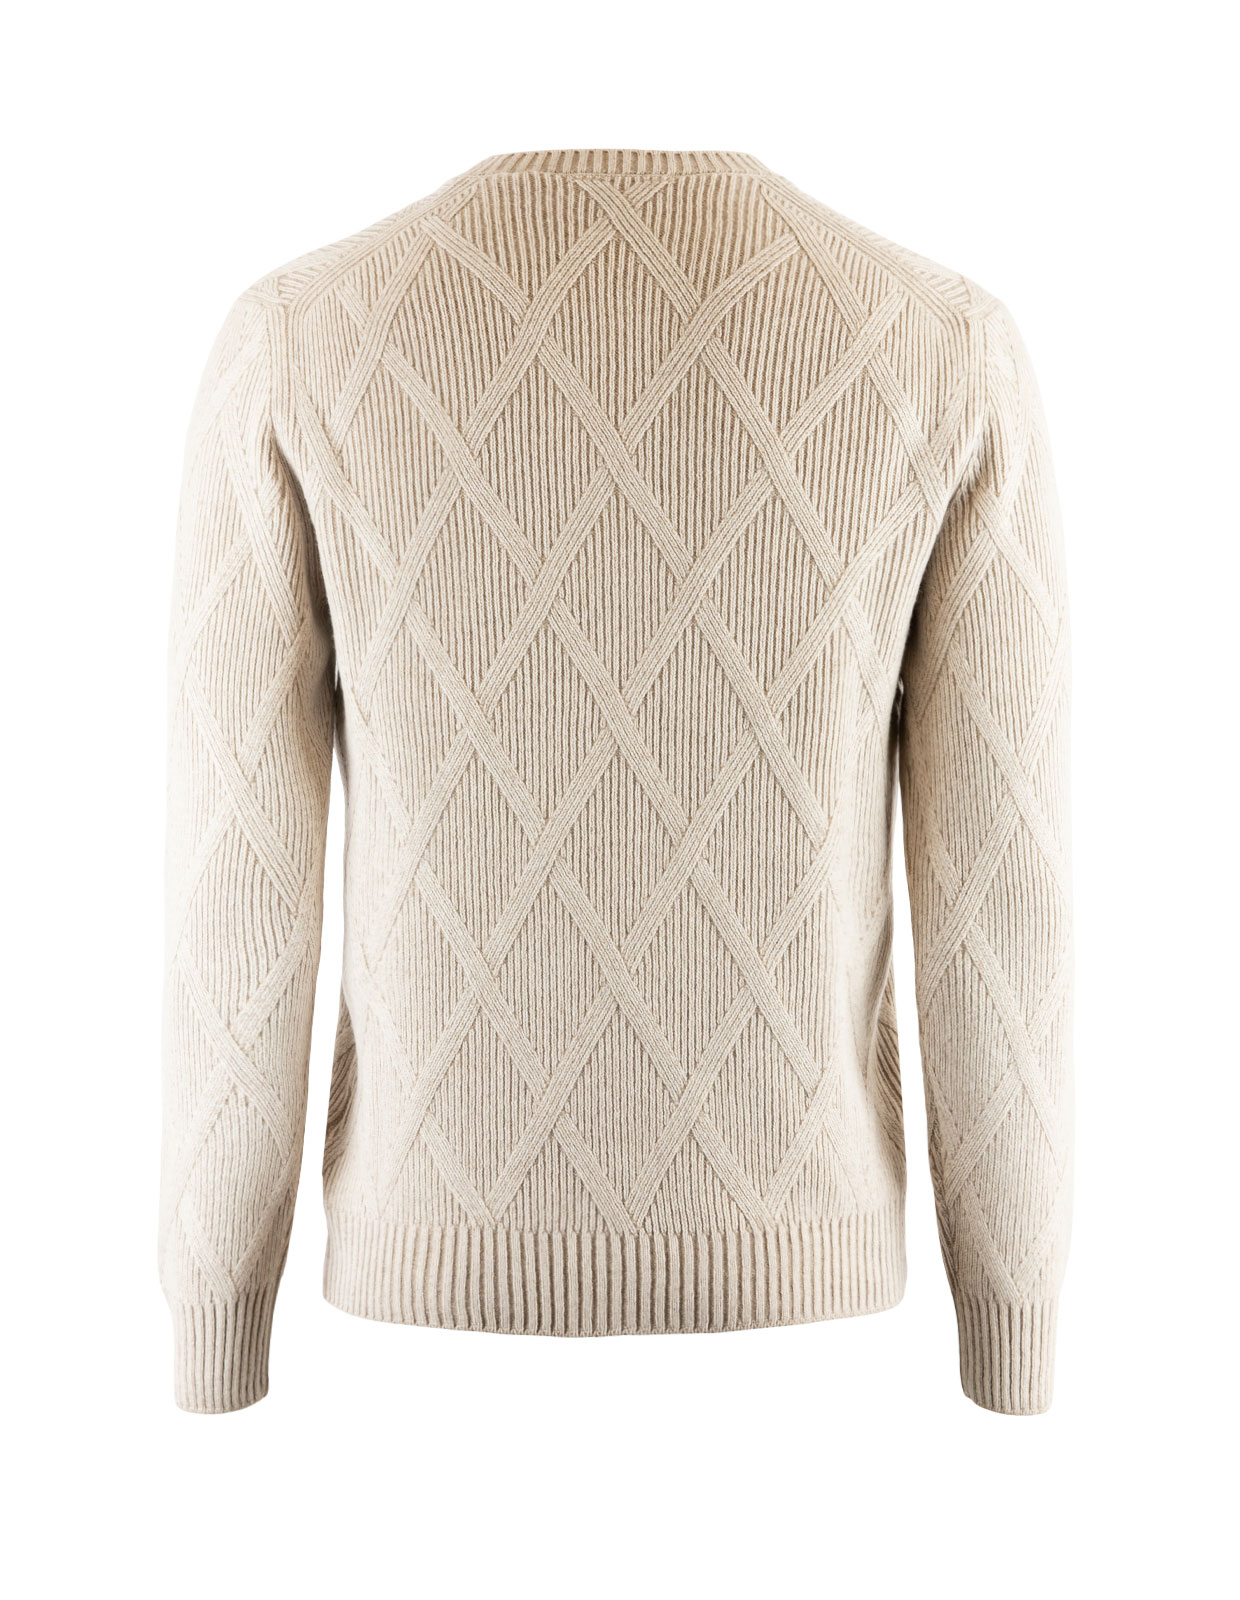 Crew Neck Tonal Knitted Check Beige